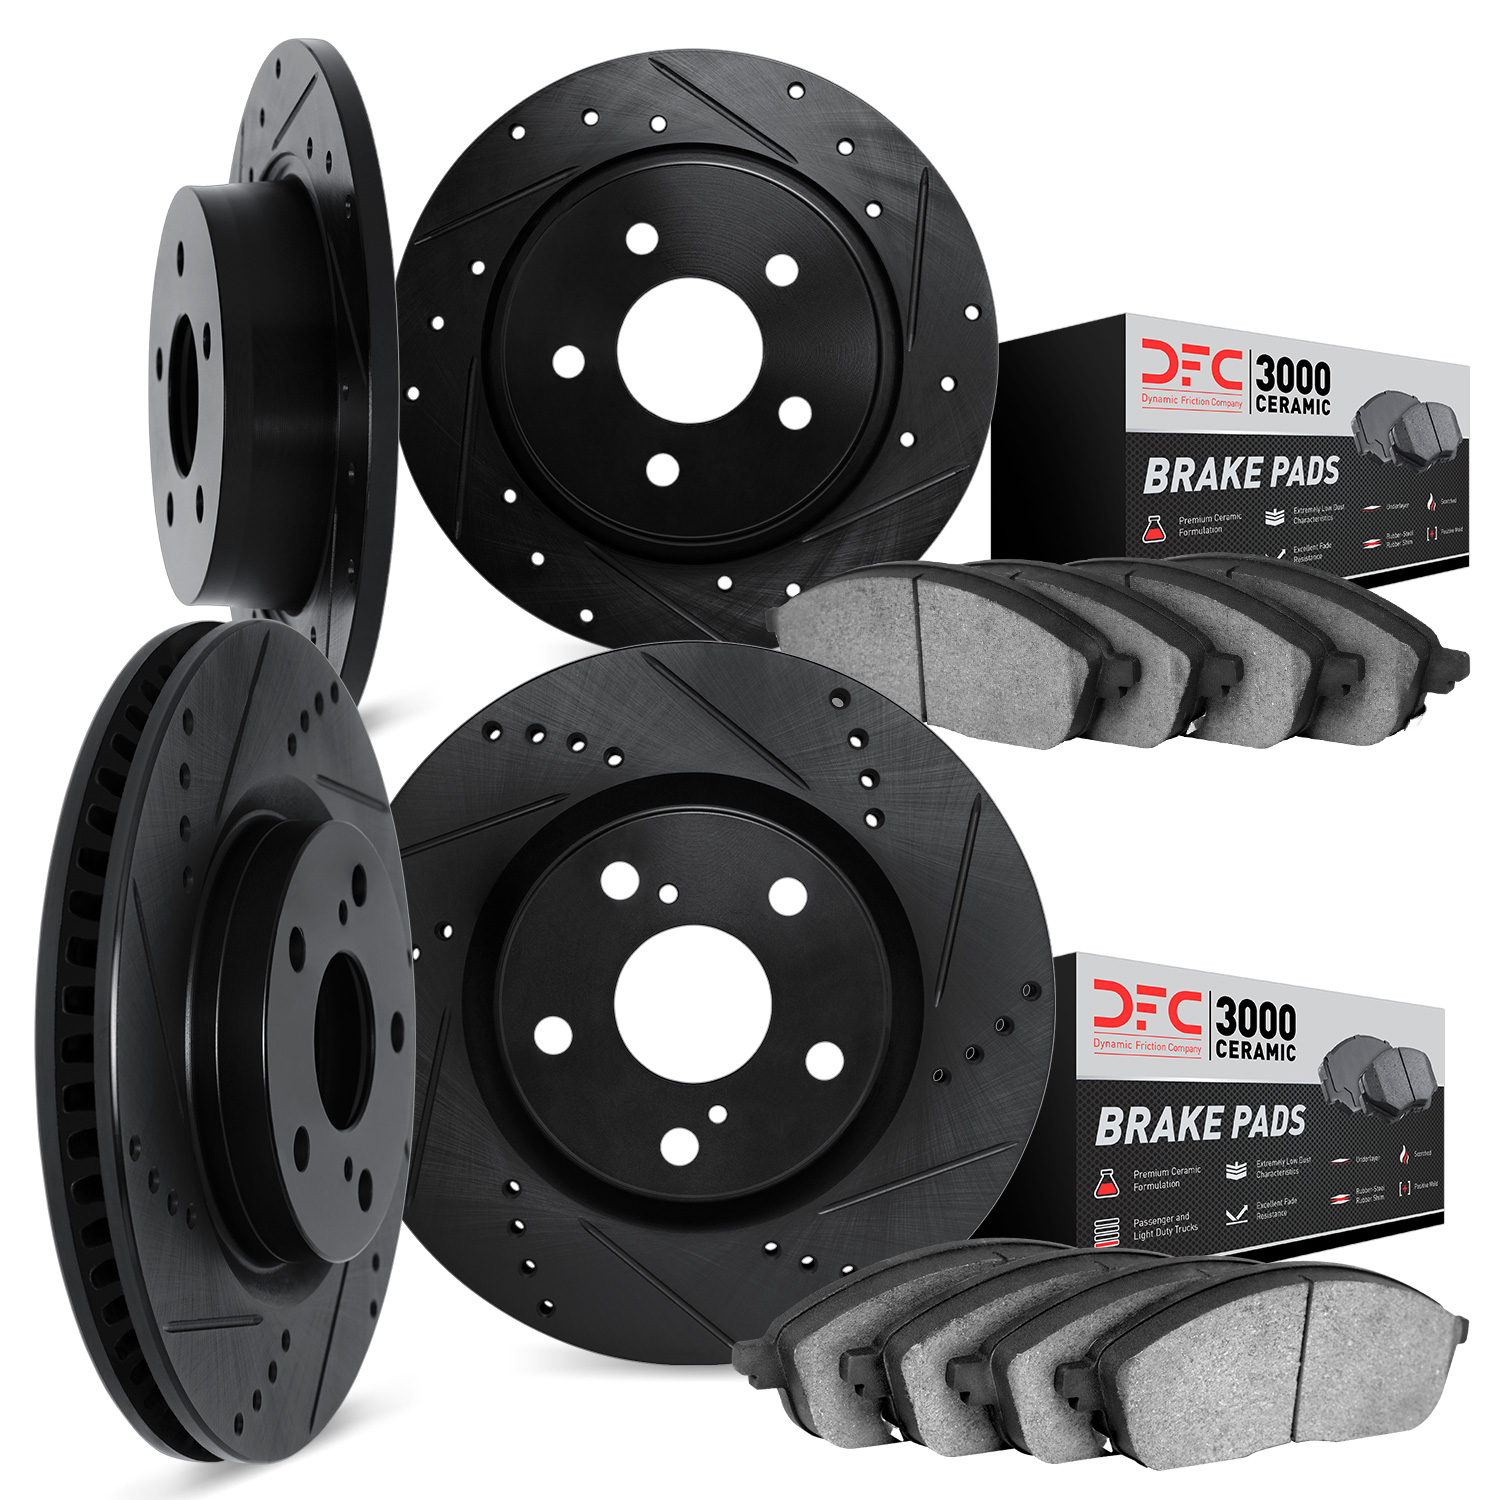 8304-45010 Drilled/Slotted Brake Rotors with 3000-Series Ceramic Brake Pads Kit [Black], 1998-2002 GM, Position: Front and Rear